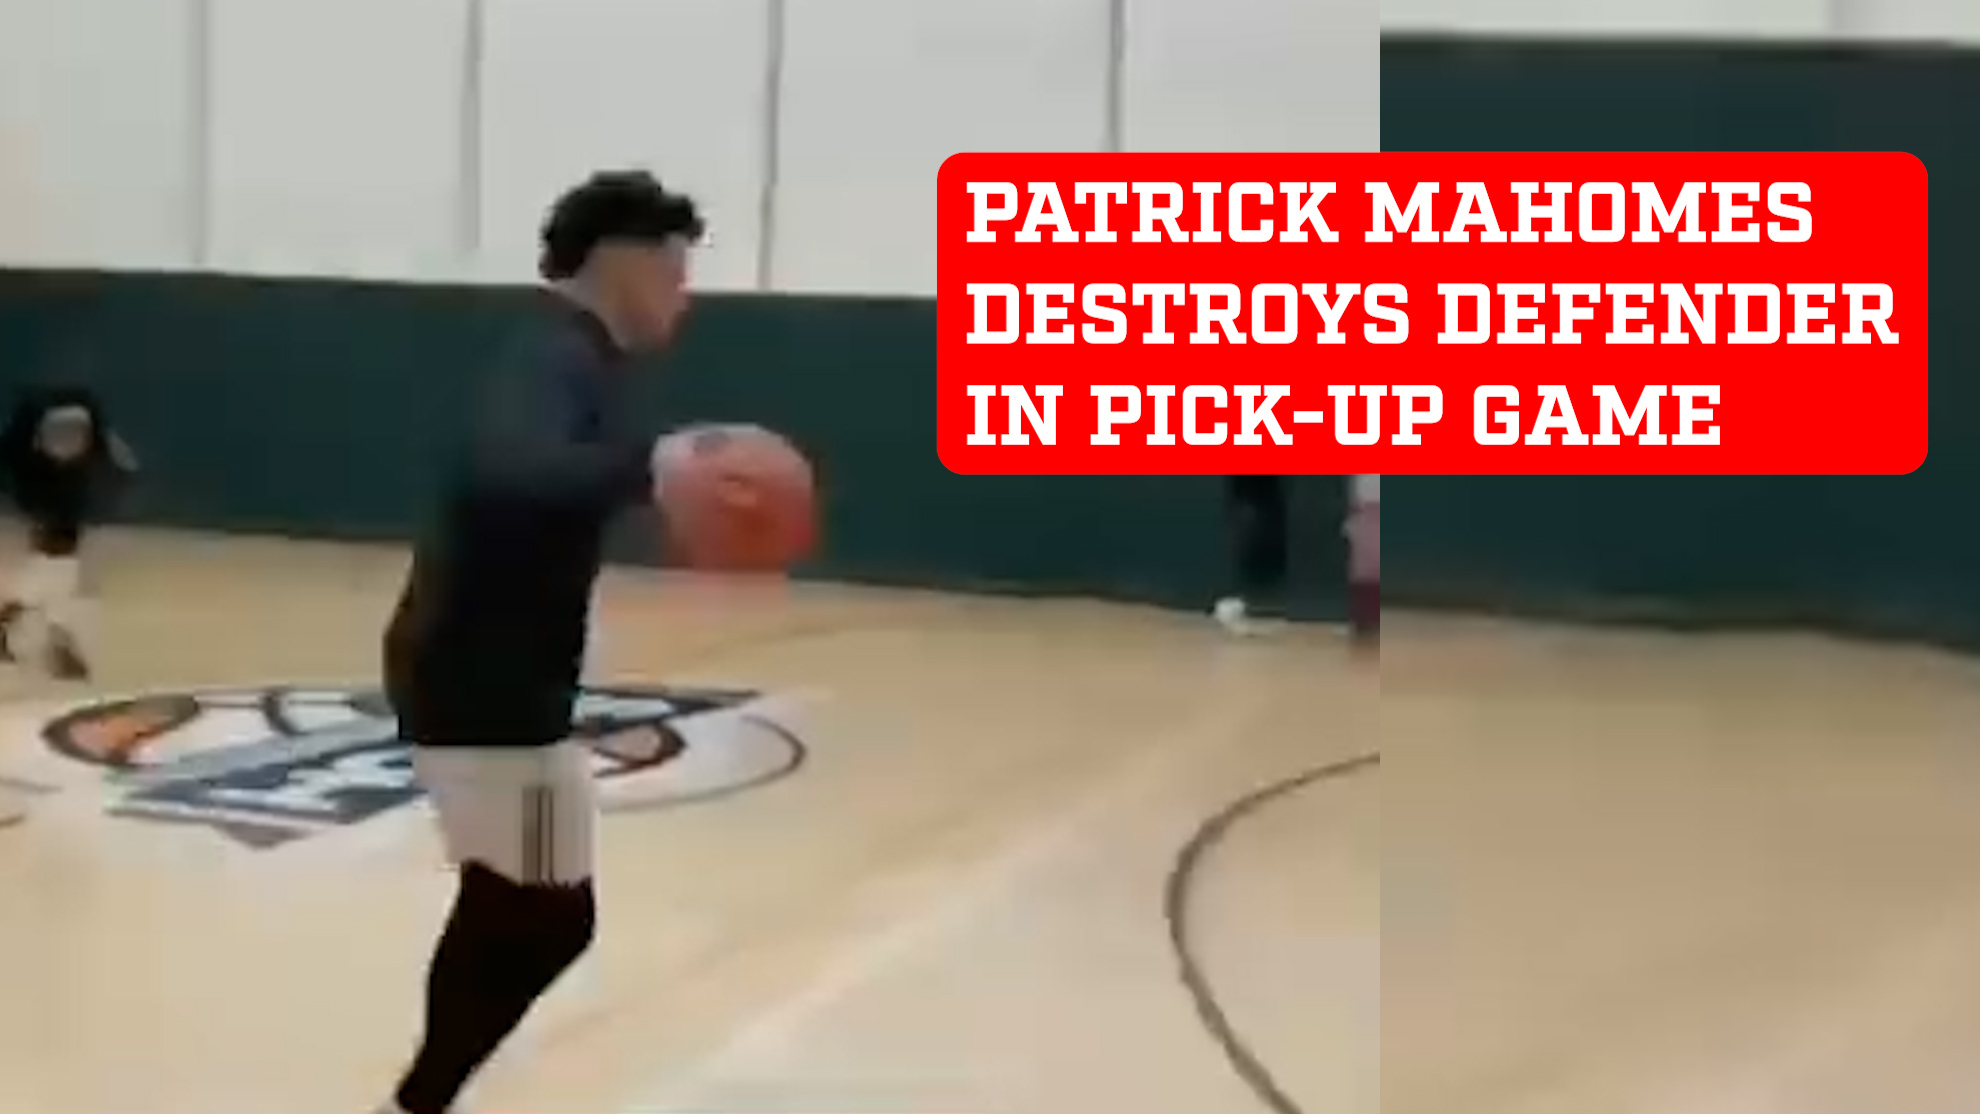 Patrick Mahomes destroys defender in pick-up basketball game as throwback video goes viral again